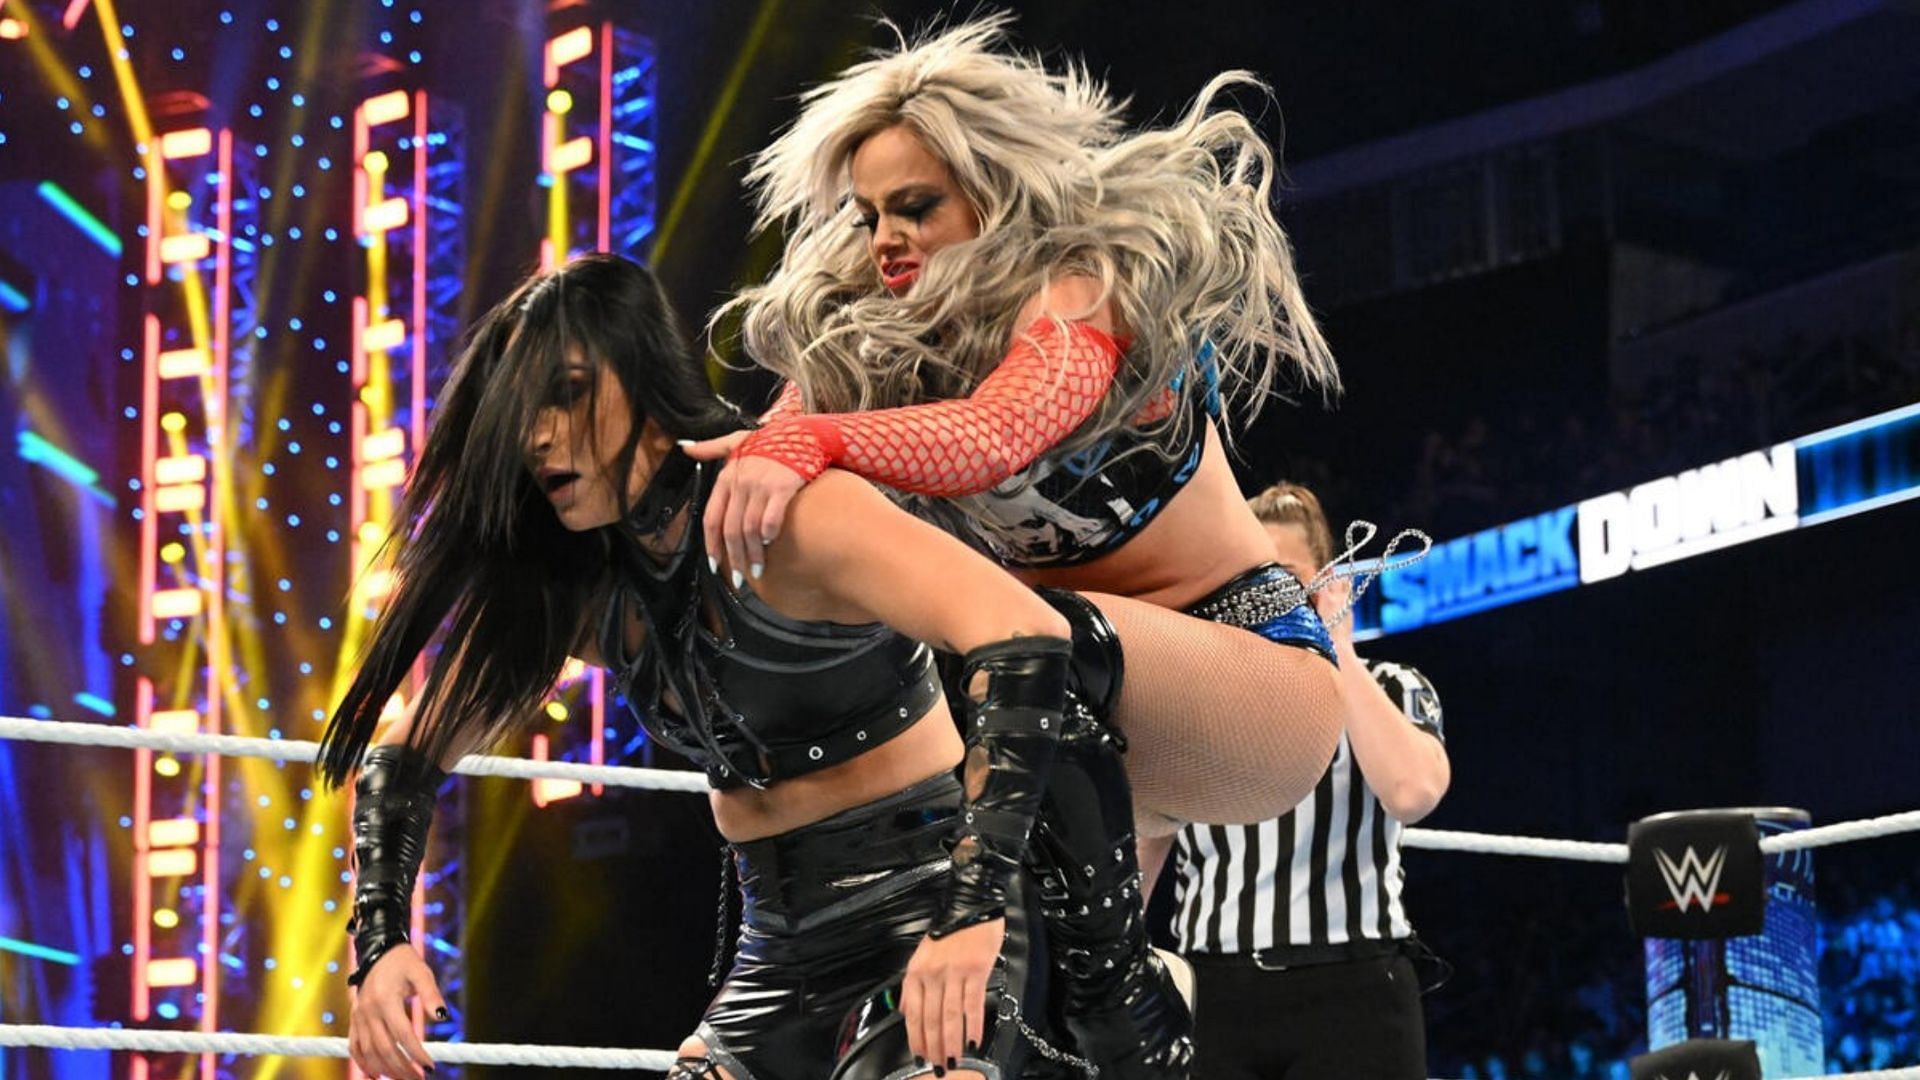 Liv Morgan and Sonya Deville were on hand for a former WWE superstar